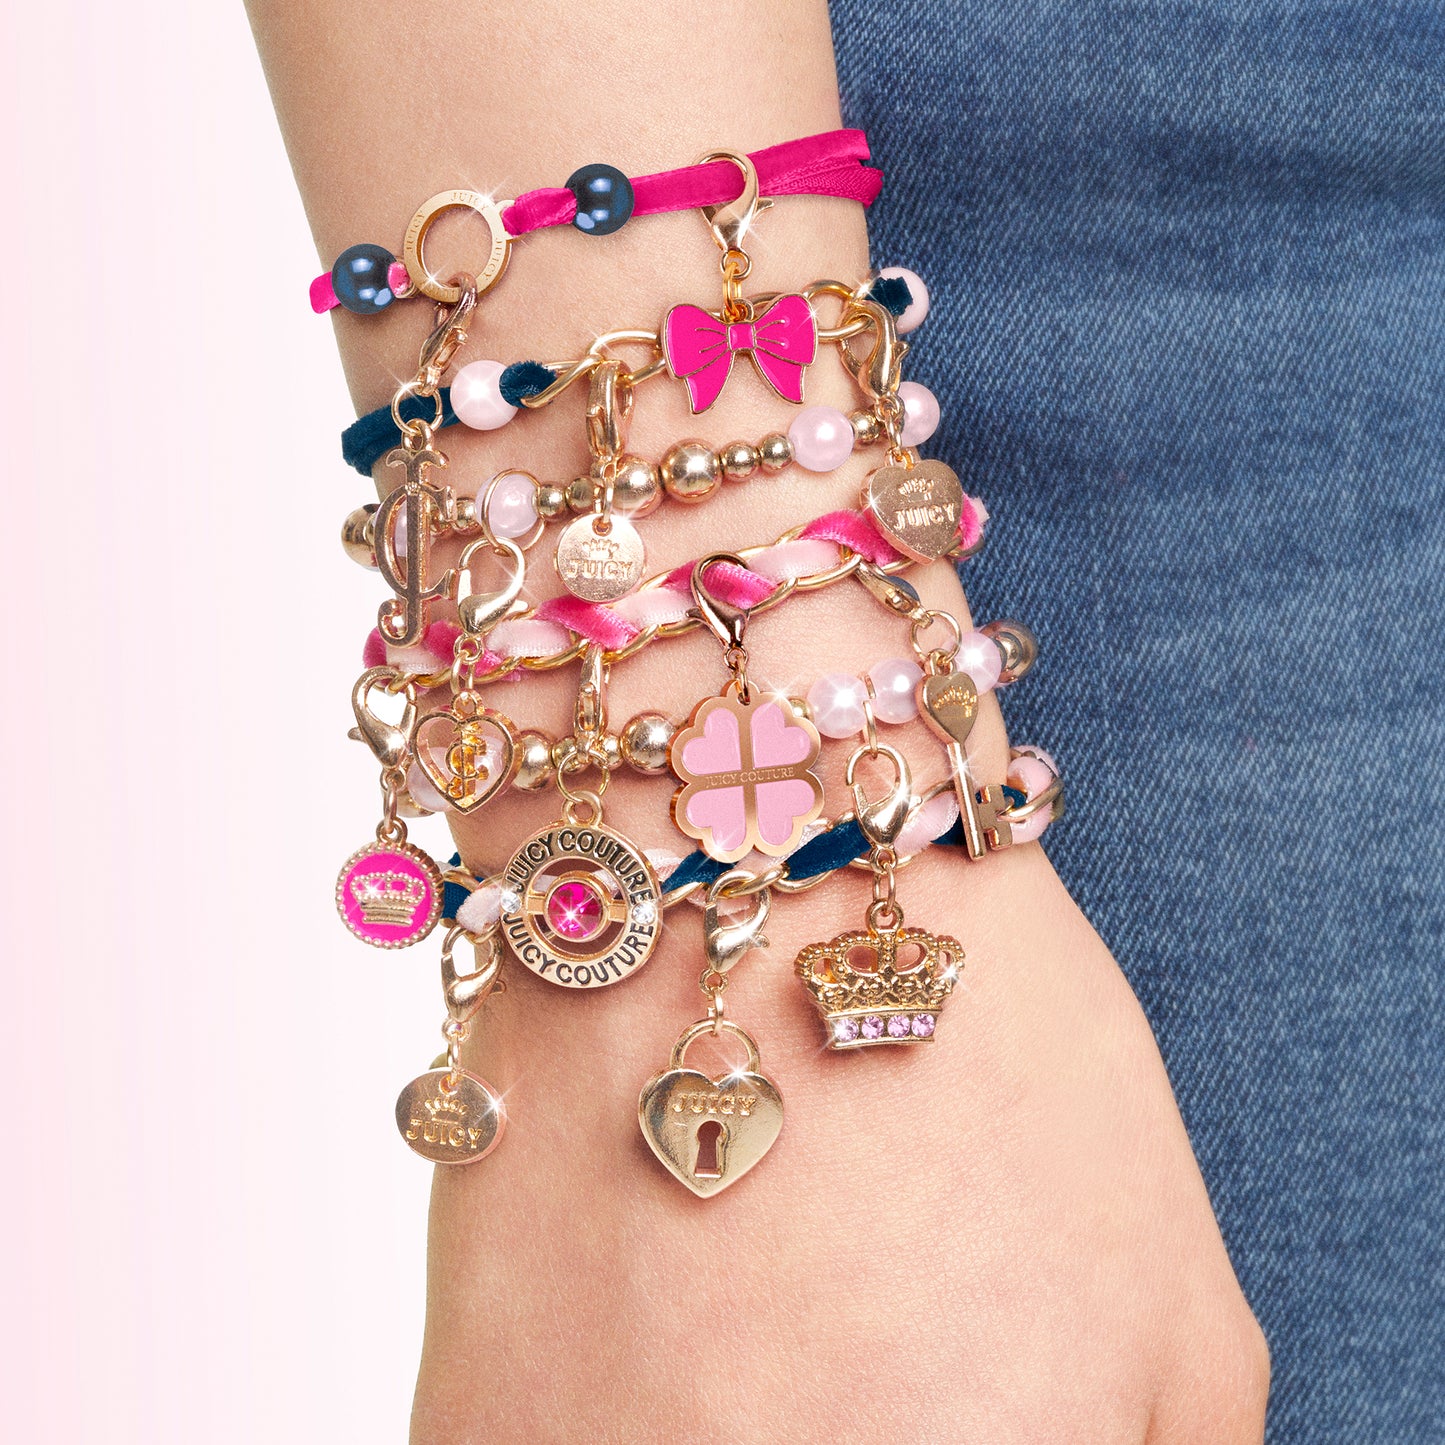 Juicy Couture™ Charmed by Velvet & Pearls Bracelets